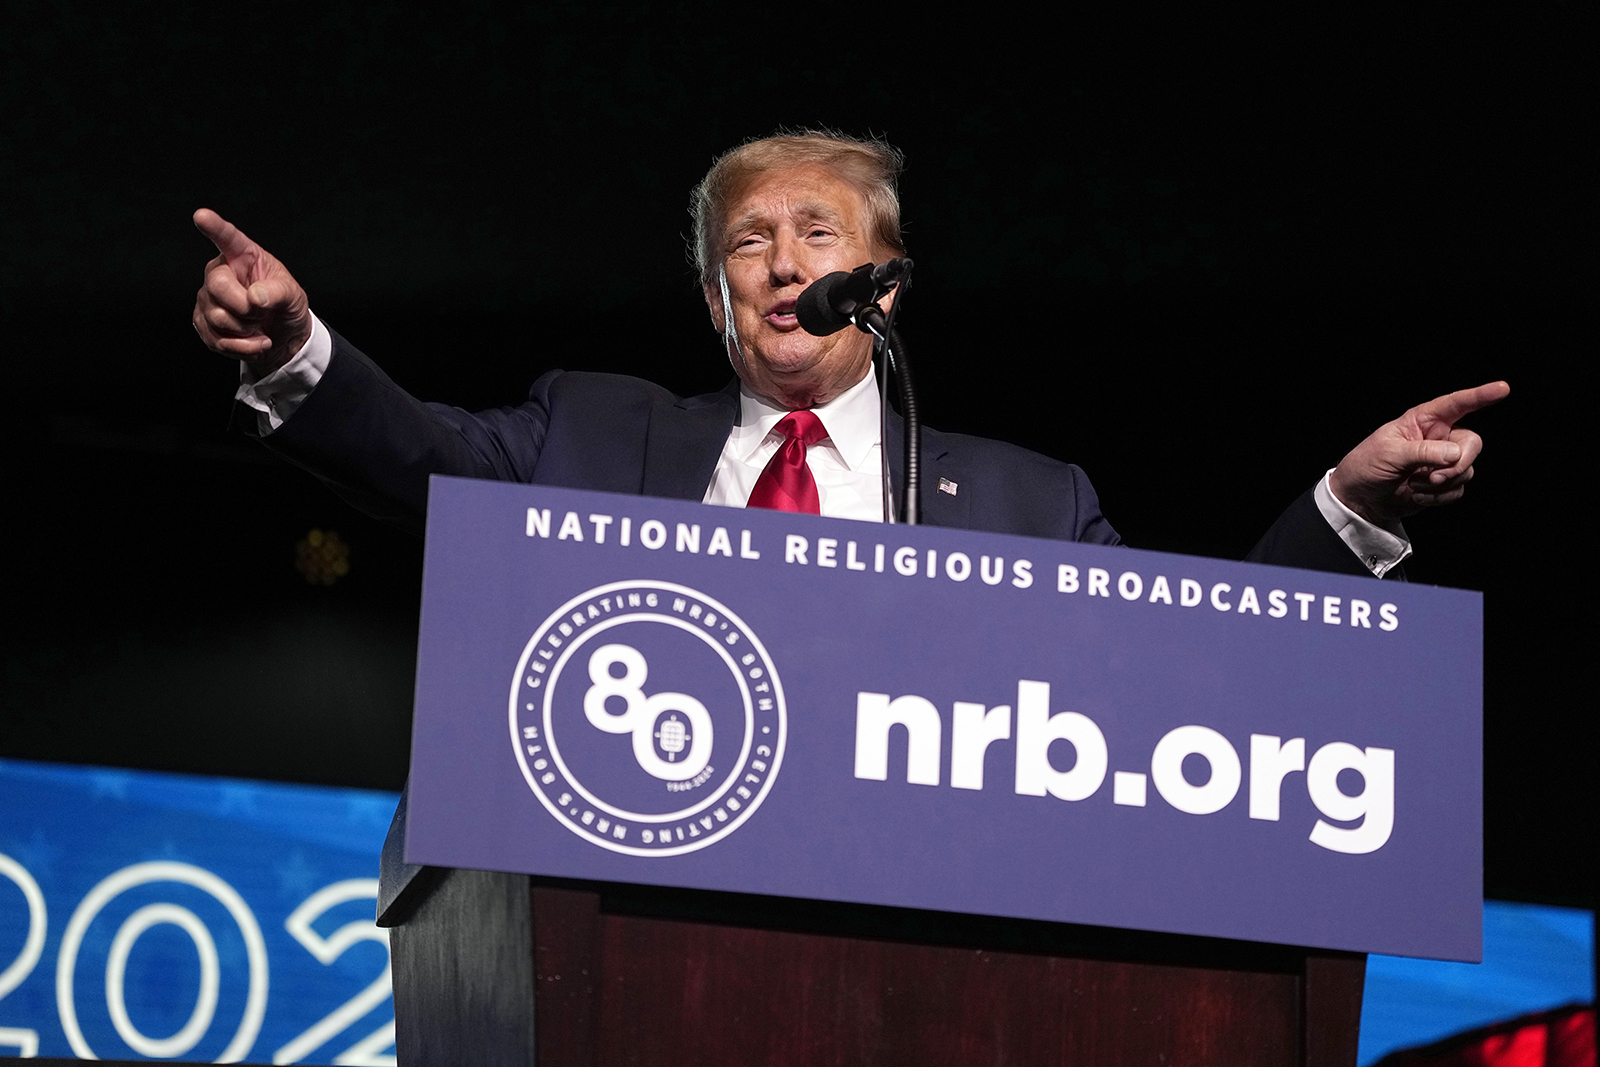 Trump promises a revival of Christian power in speech to National Religious Broadcasters